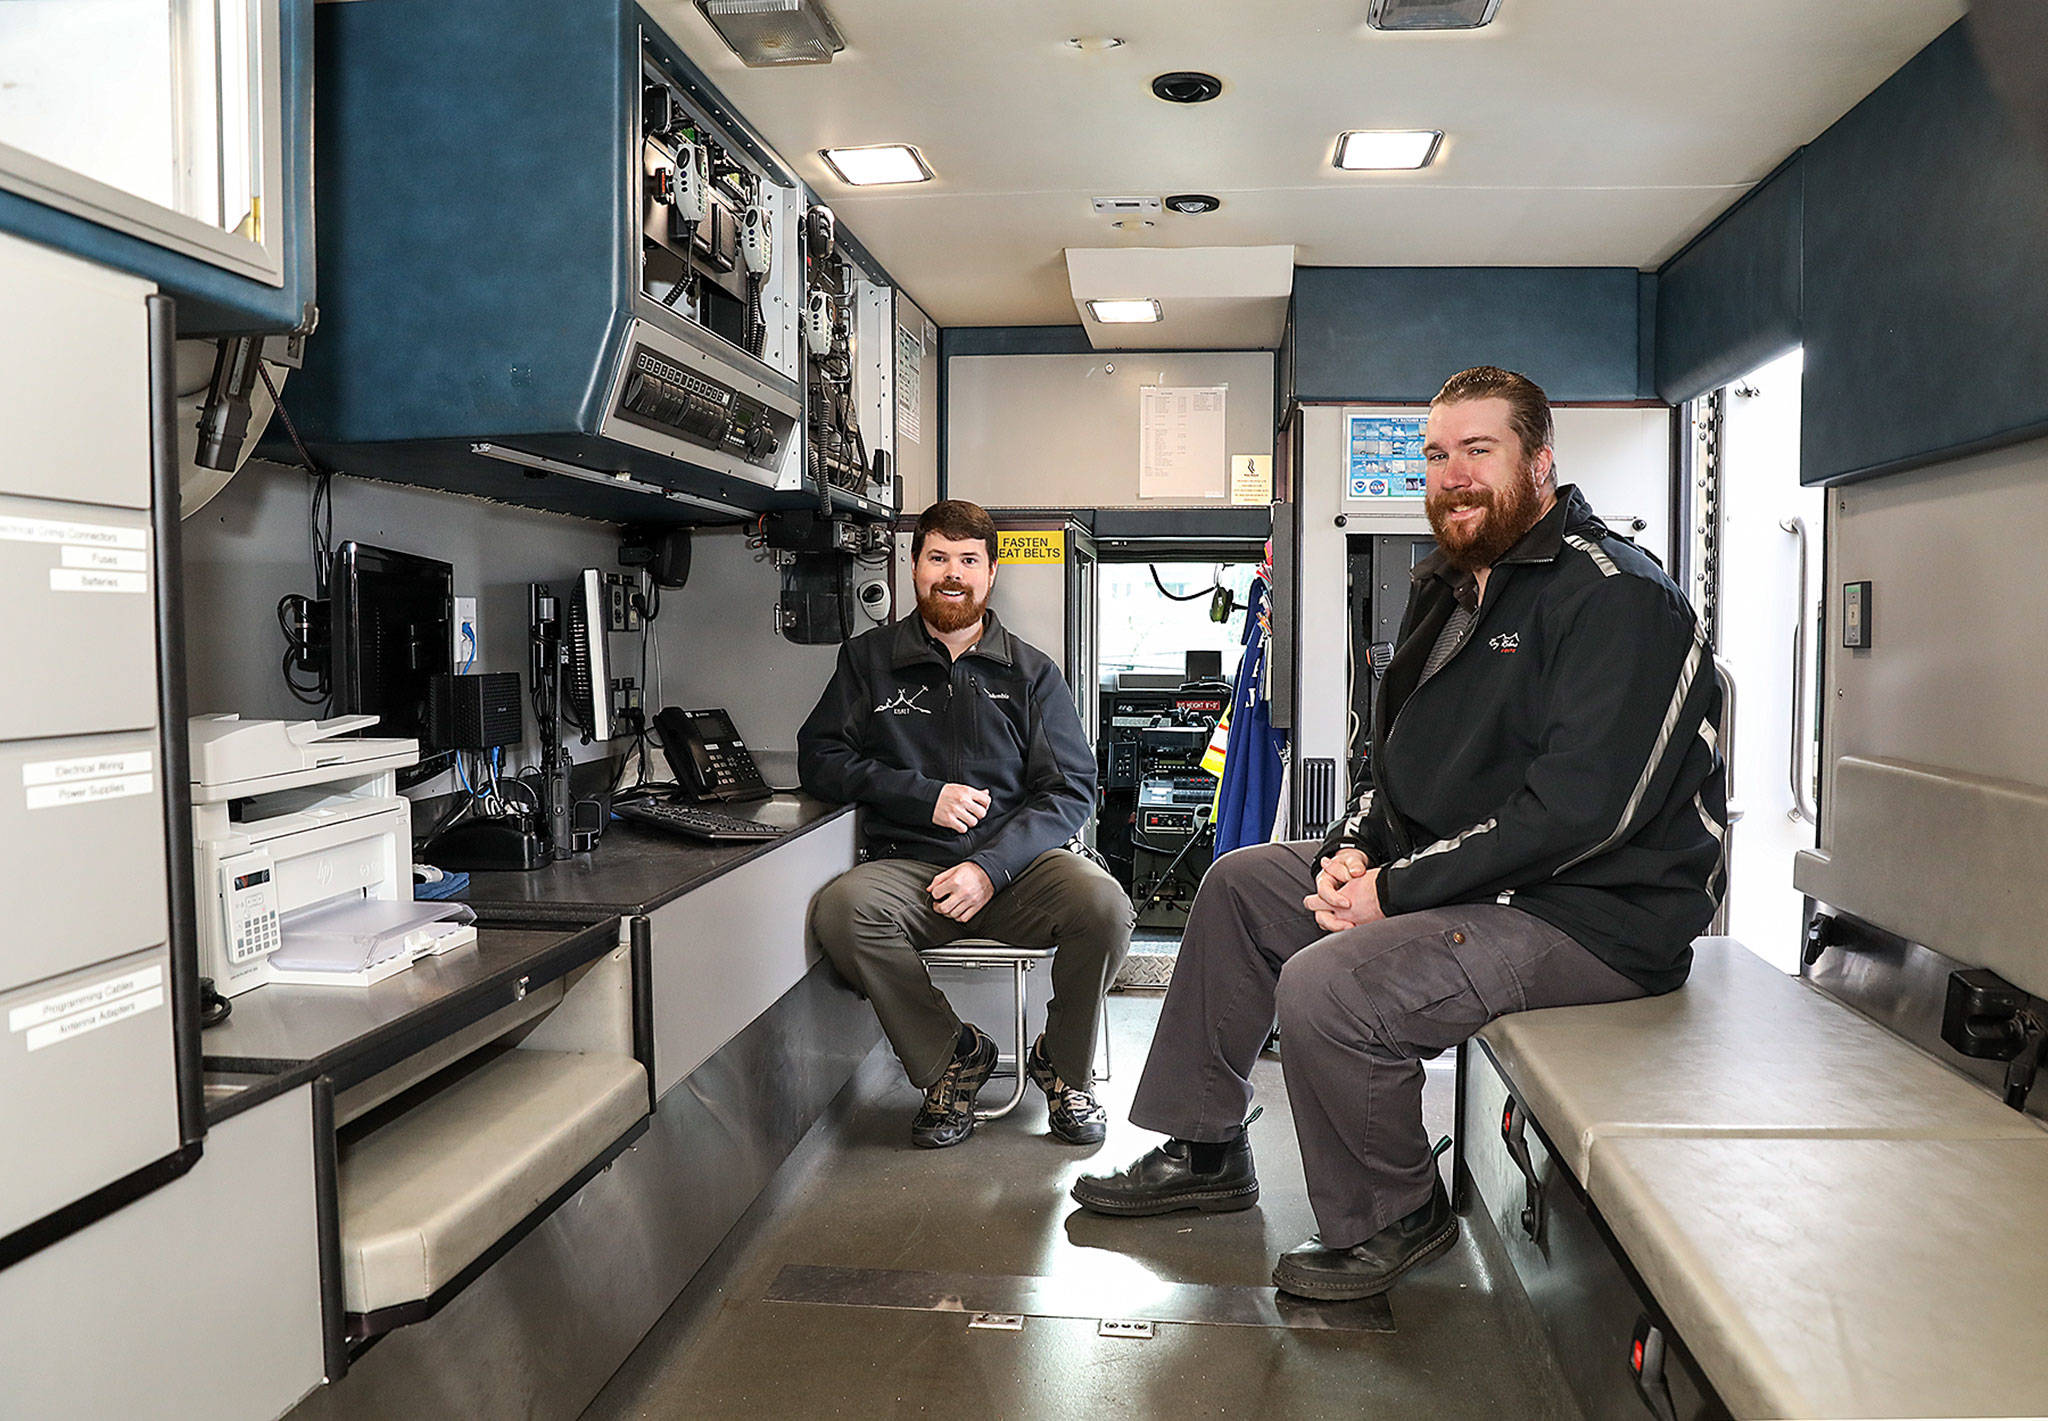 Longtime friends Kyle Burgess (left) and Matt Benjamin are helping the city of Marysville develop a communication system for emergency response. (Lizz Giordano / The Herald)